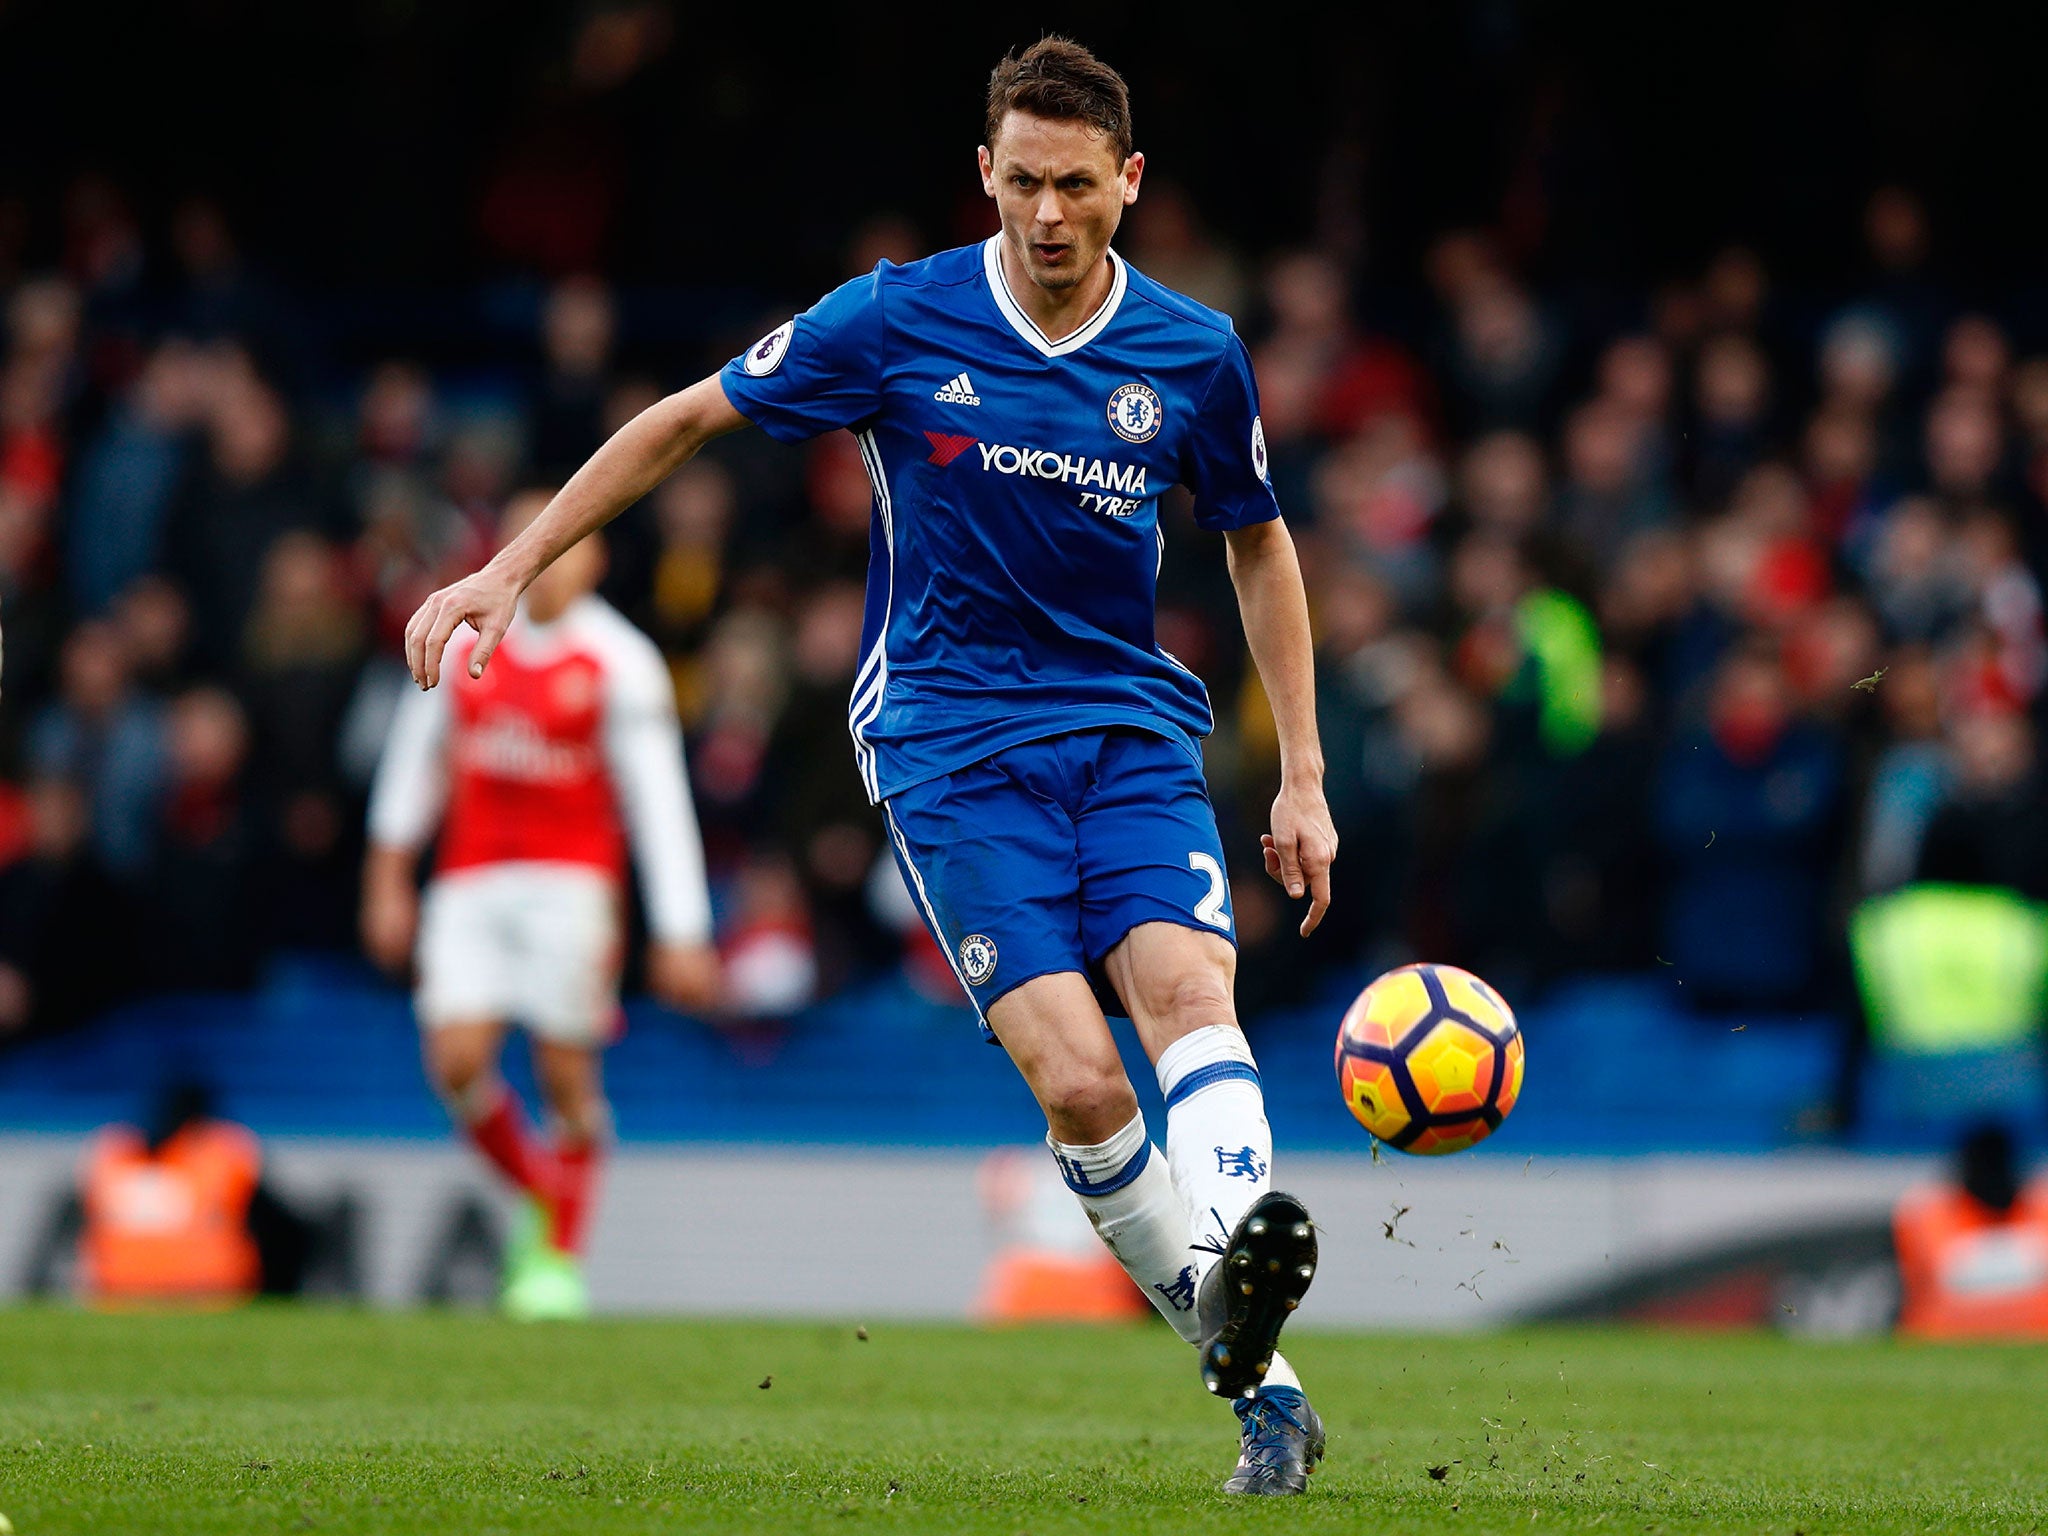 Matic has said the season remains open until it's officially over